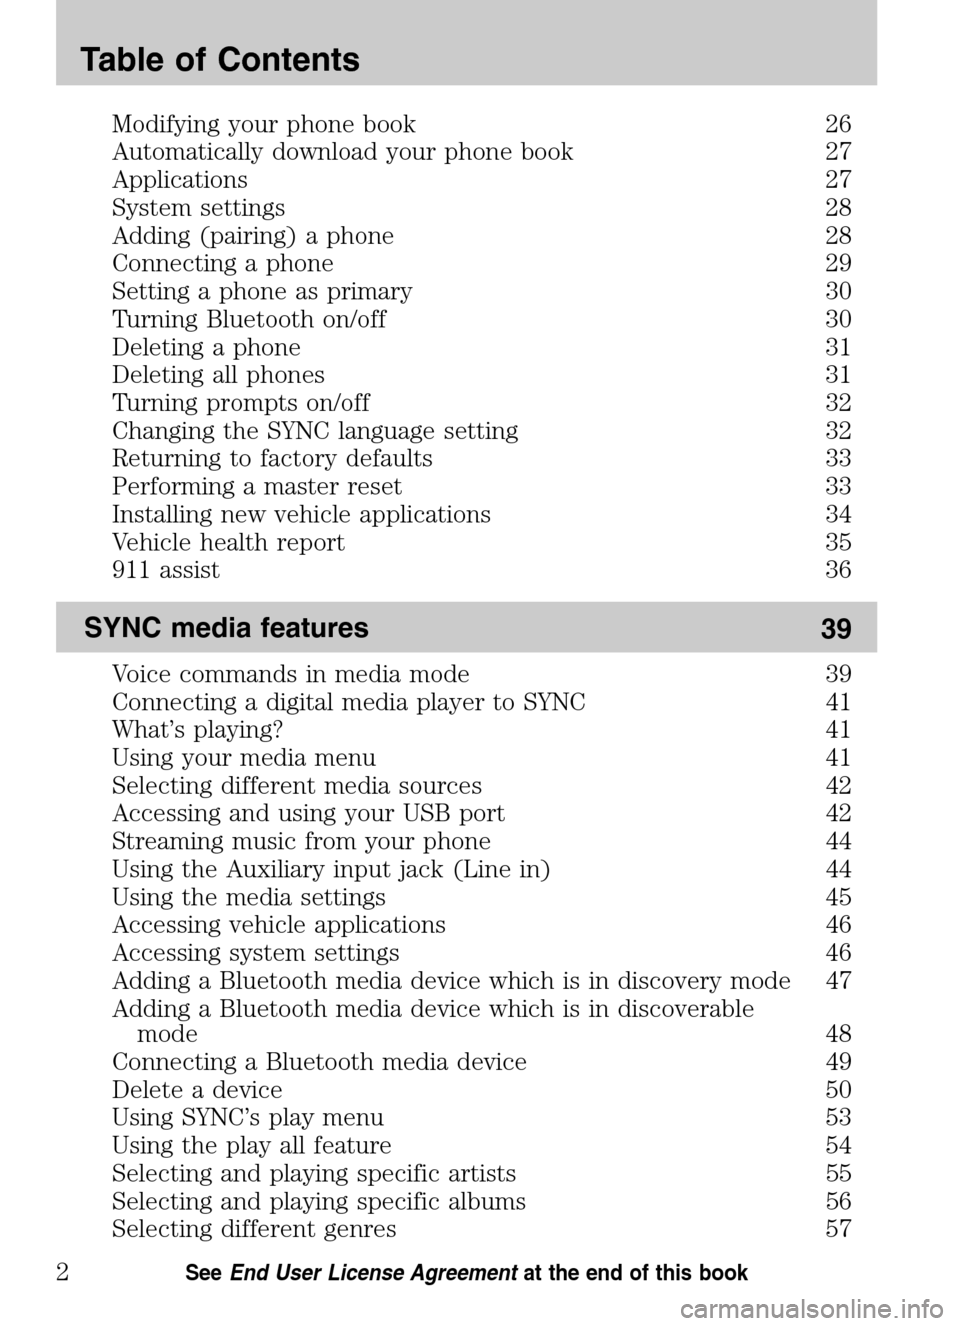 Mercury Mariner 2009  SYNC Supplement  Modifying your phone book 26 
Automatically download your phone book 27
Applications 27
System settings 28
Adding (pairing) a phone 28
Connecting a phone 29
Setting a phone as primary 30
Turning Bluet